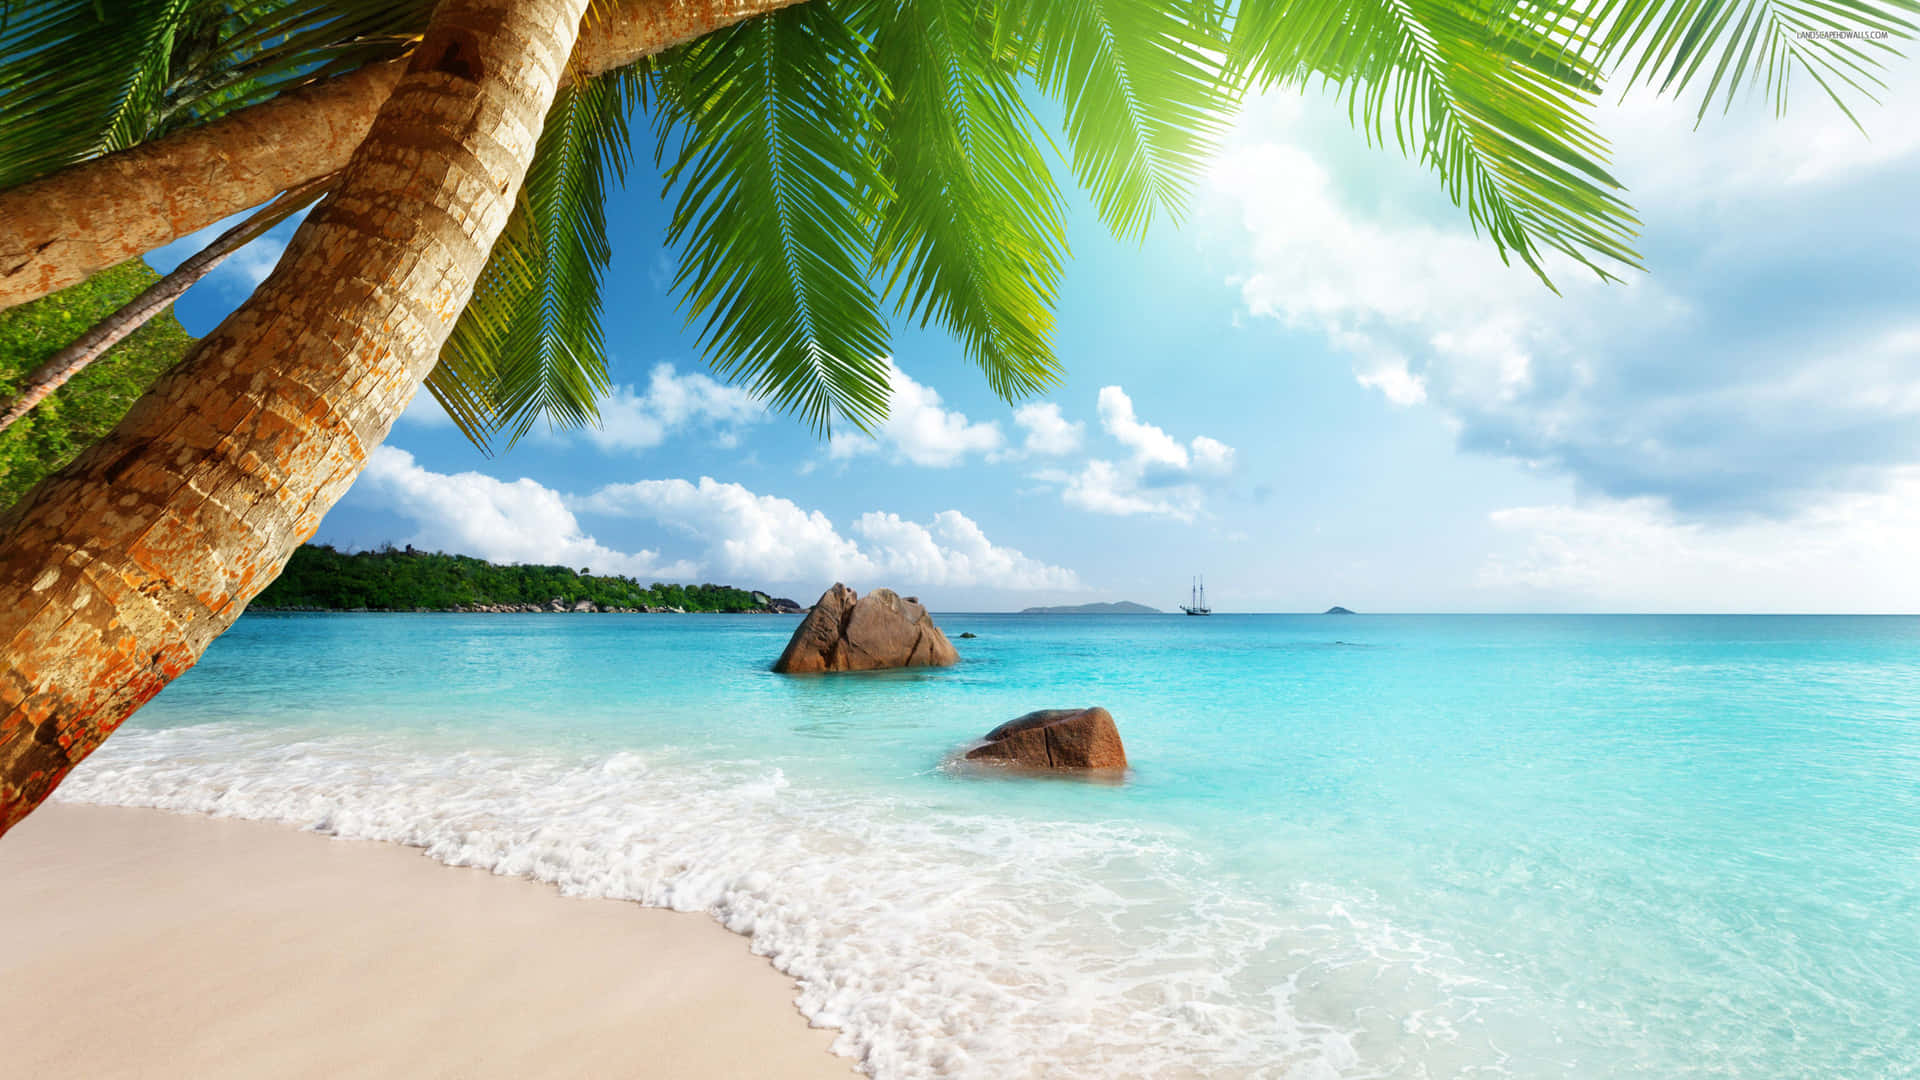 A Beach With Palm Trees And A Blue Ocean Wallpaper